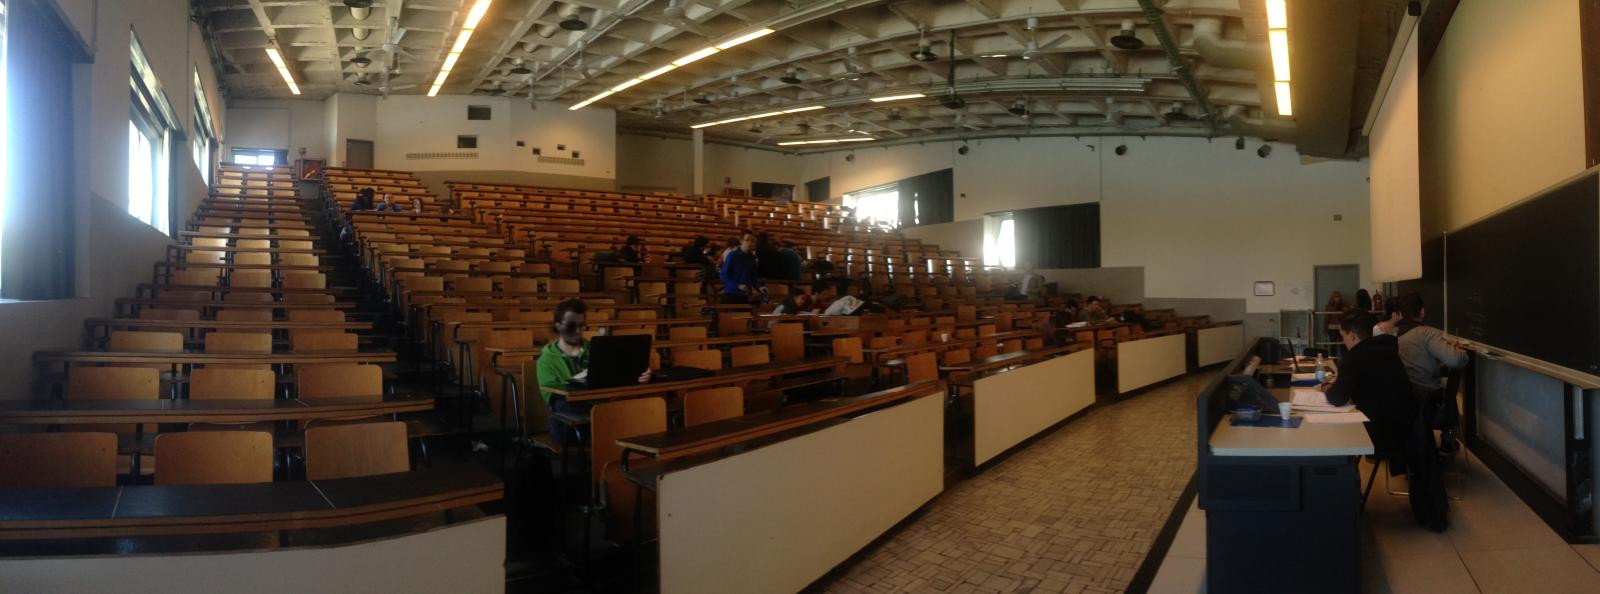 A 180° view of the room